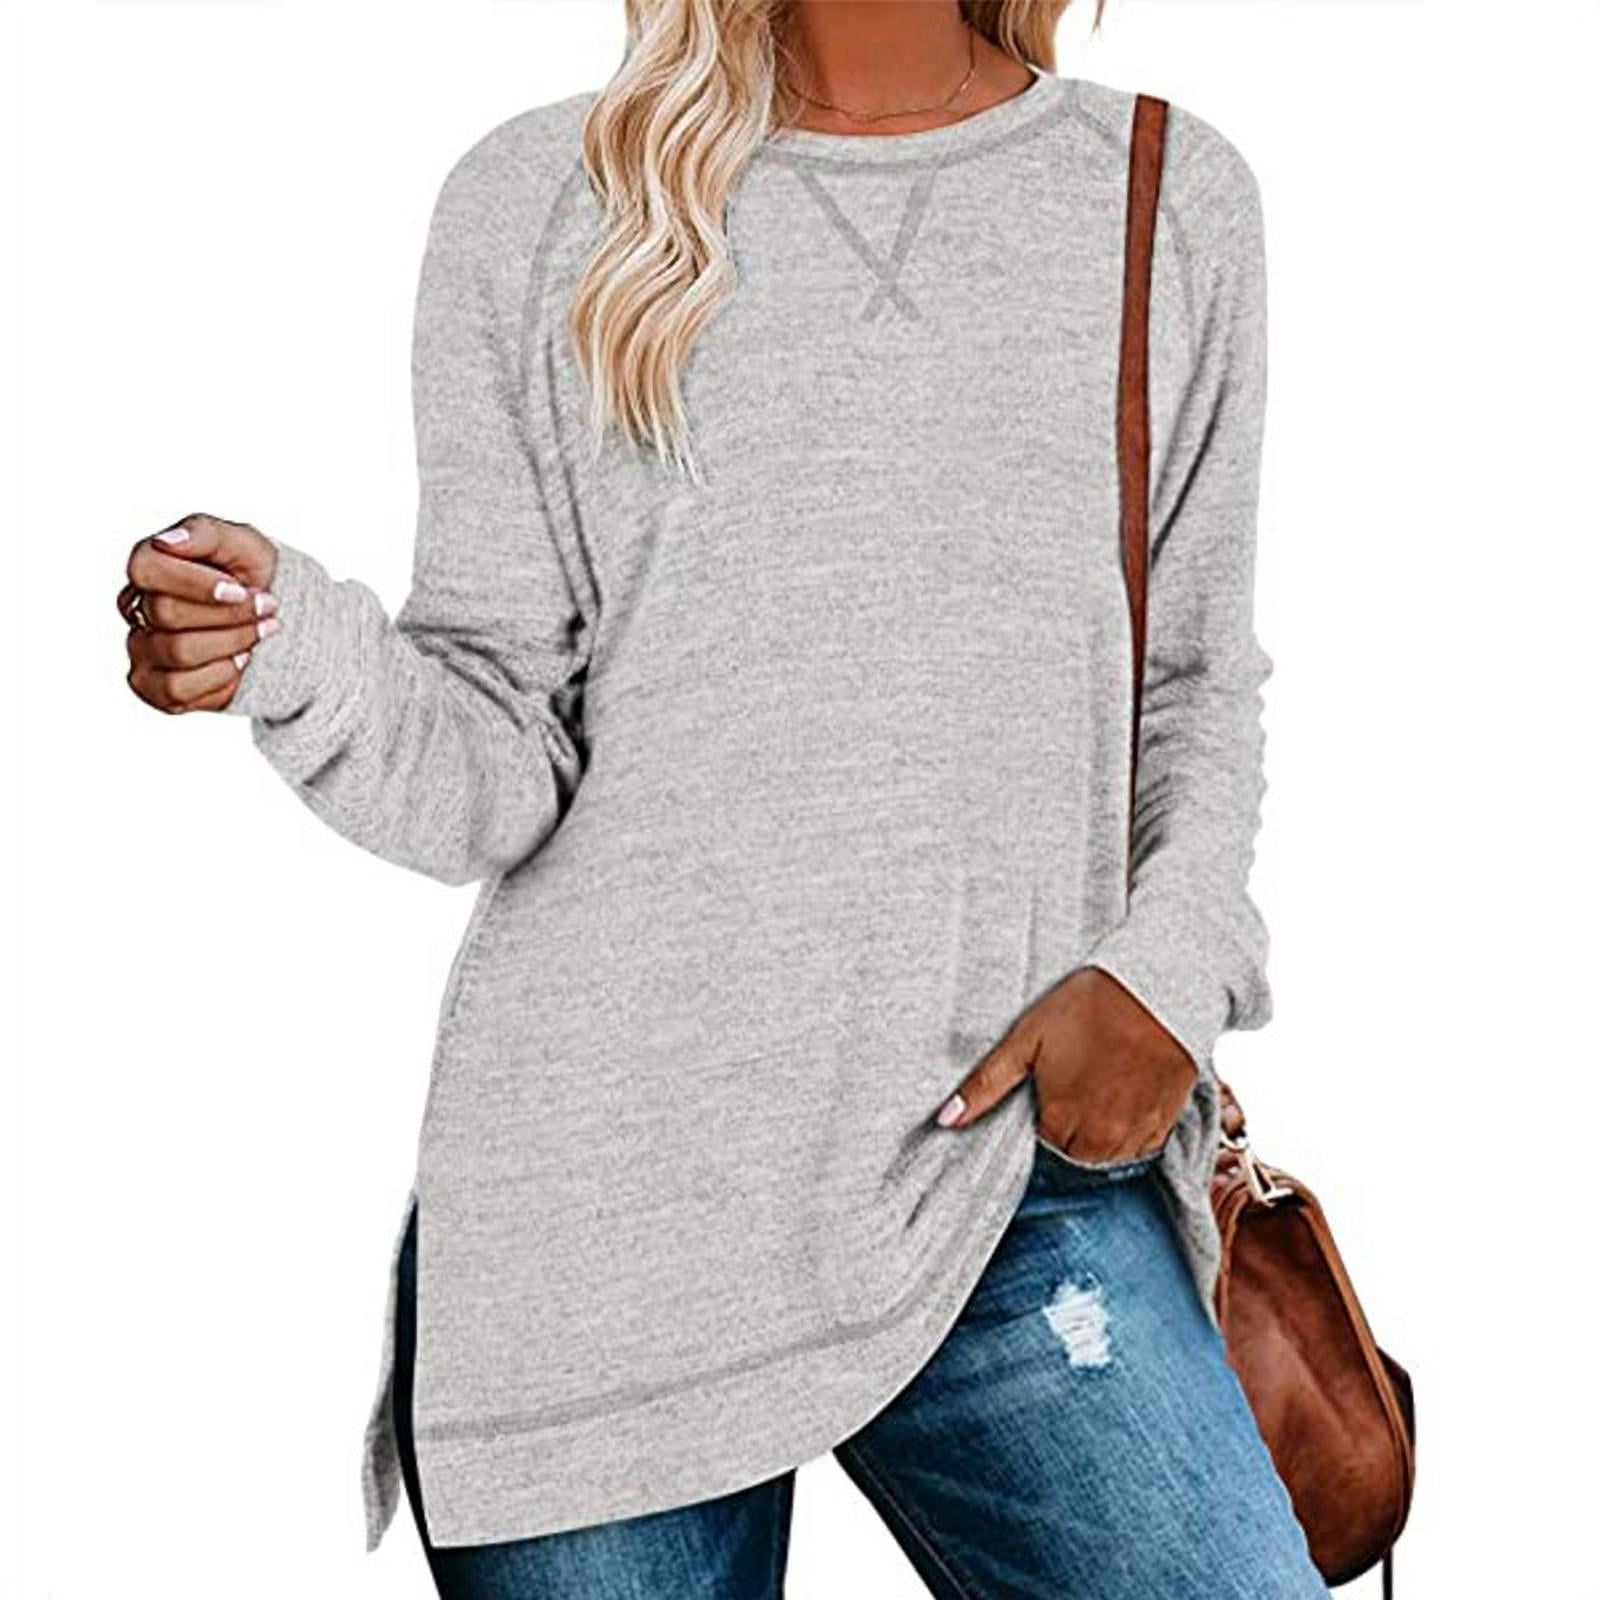 Women's Fashion Clothes Casual Solid Color Round Neck Pullover Top Long ...